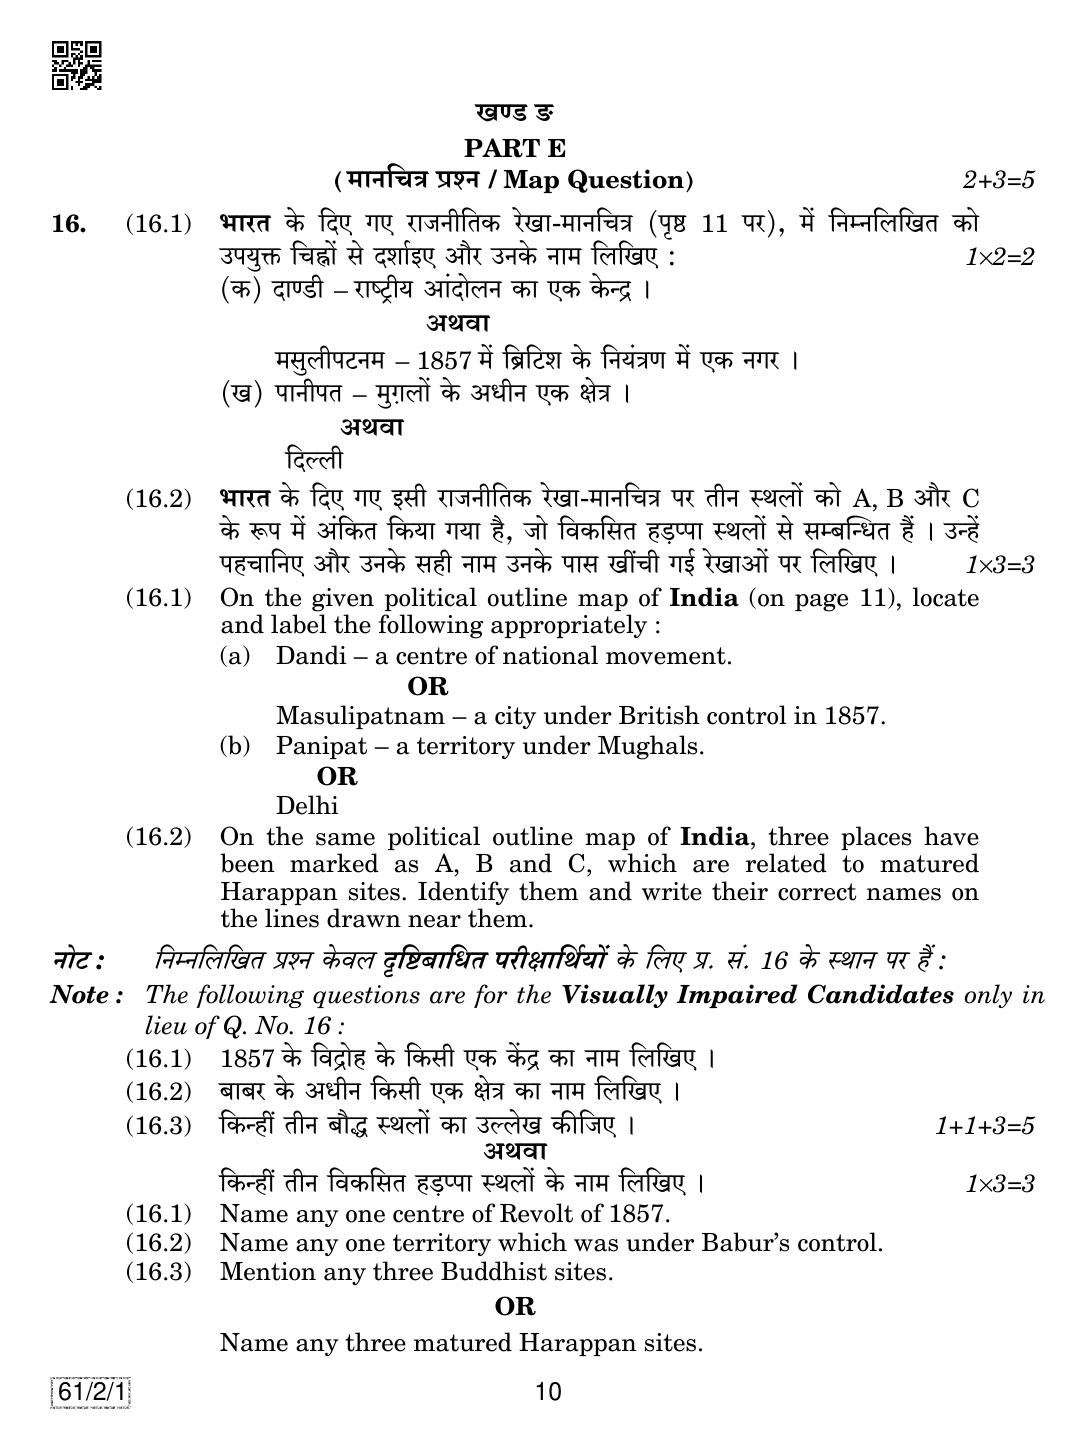 CBSE Class 12 61-2-1 History 2019 Question Paper - Page 10